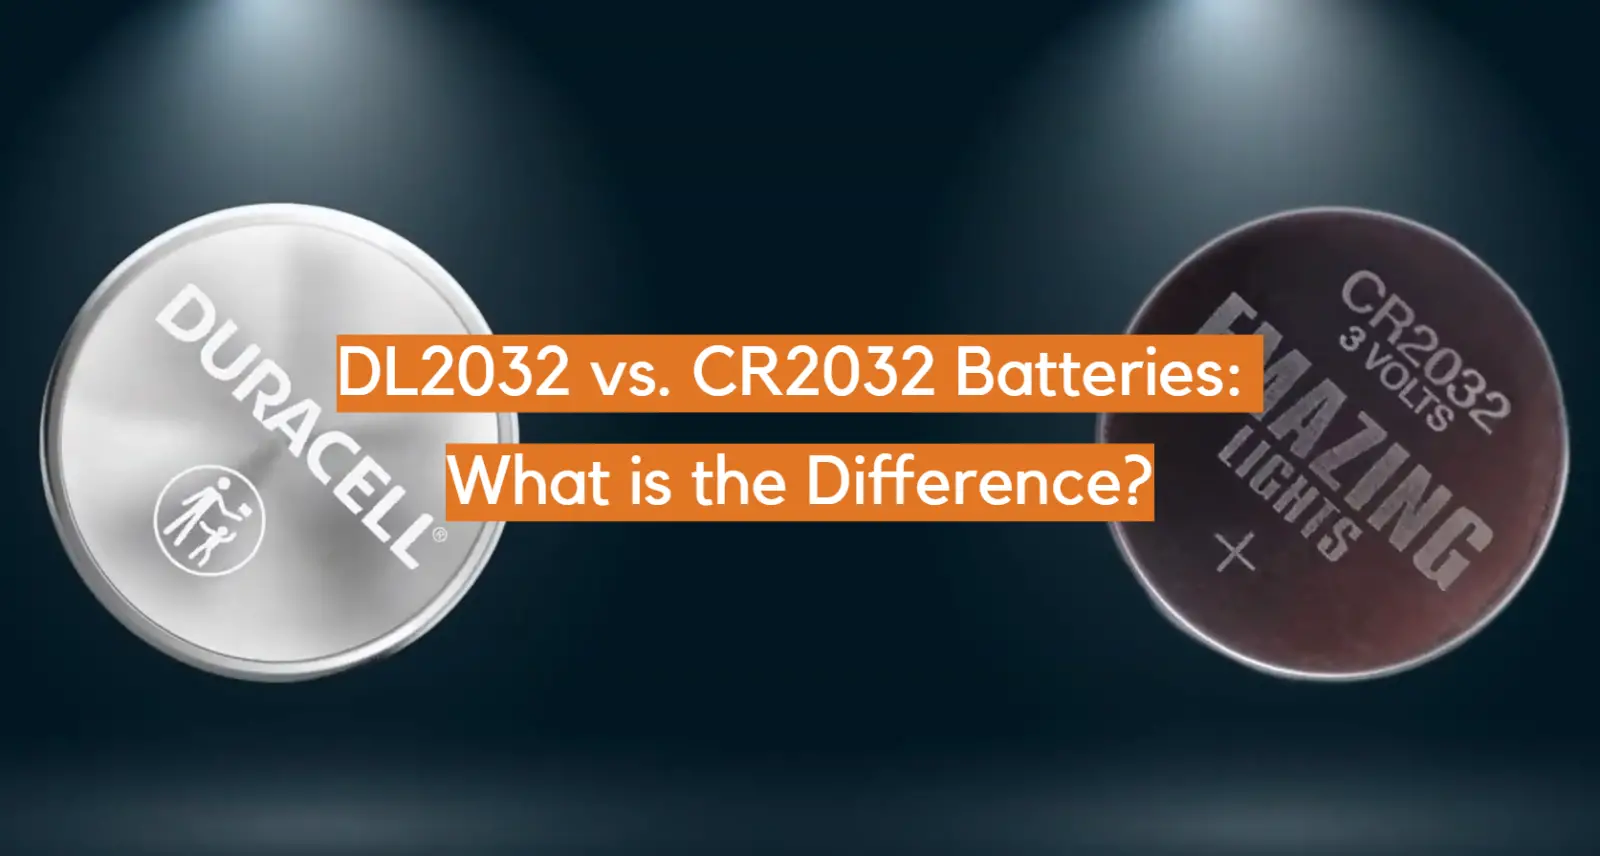 DL2032 vs. CR2032 Batteries: What is the Difference?